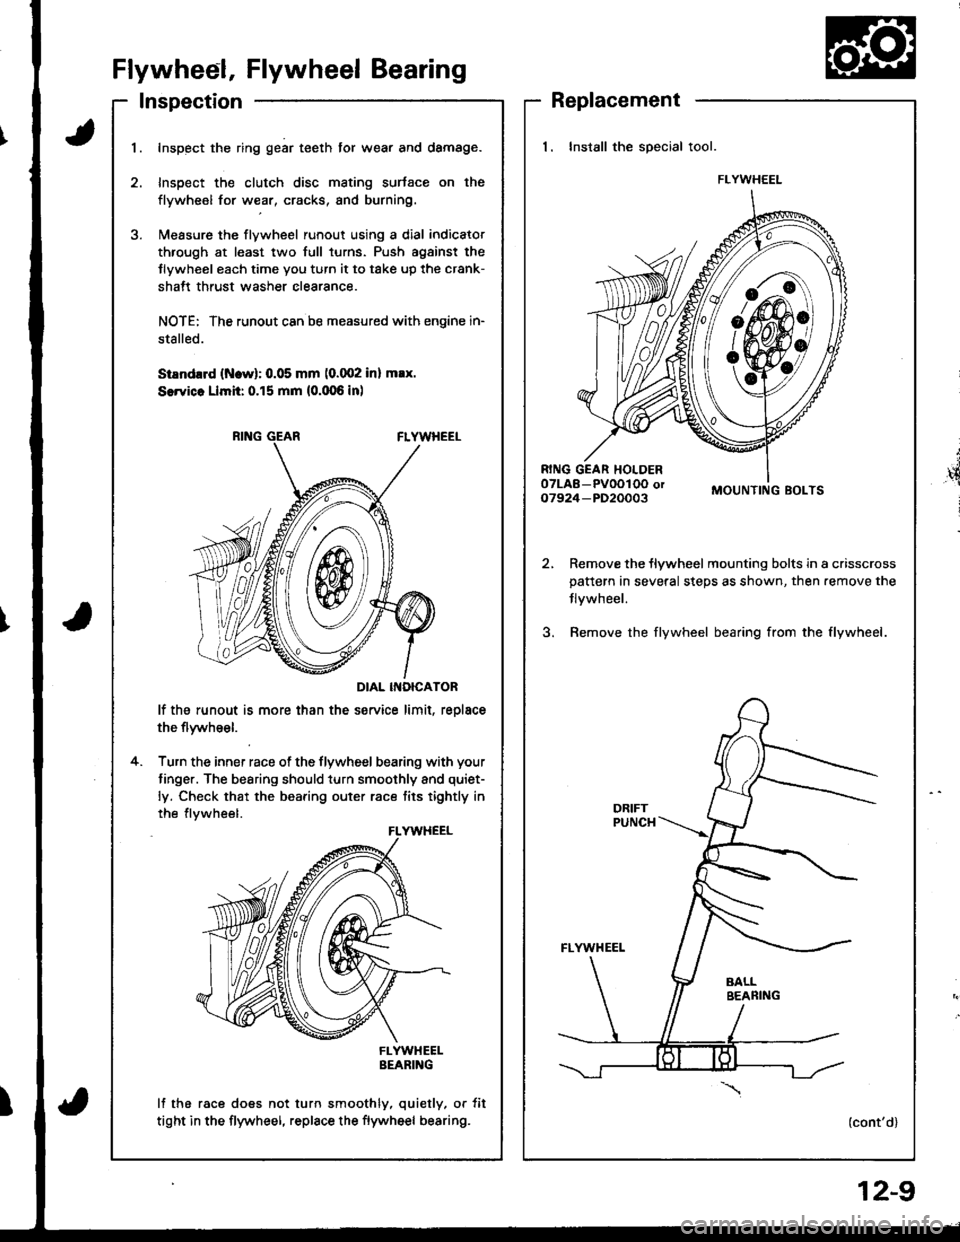 HONDA INTEGRA 1998 4.G Workshop Manual Flywheel, Flywheel Bearing
Inspection
t
,4
i
Replacement
1. Install the special tool.
MOUNTING BOLTS
Remove the flywheel mounting bolts in a crisscrosspattern in several steps as shown, then.emove th